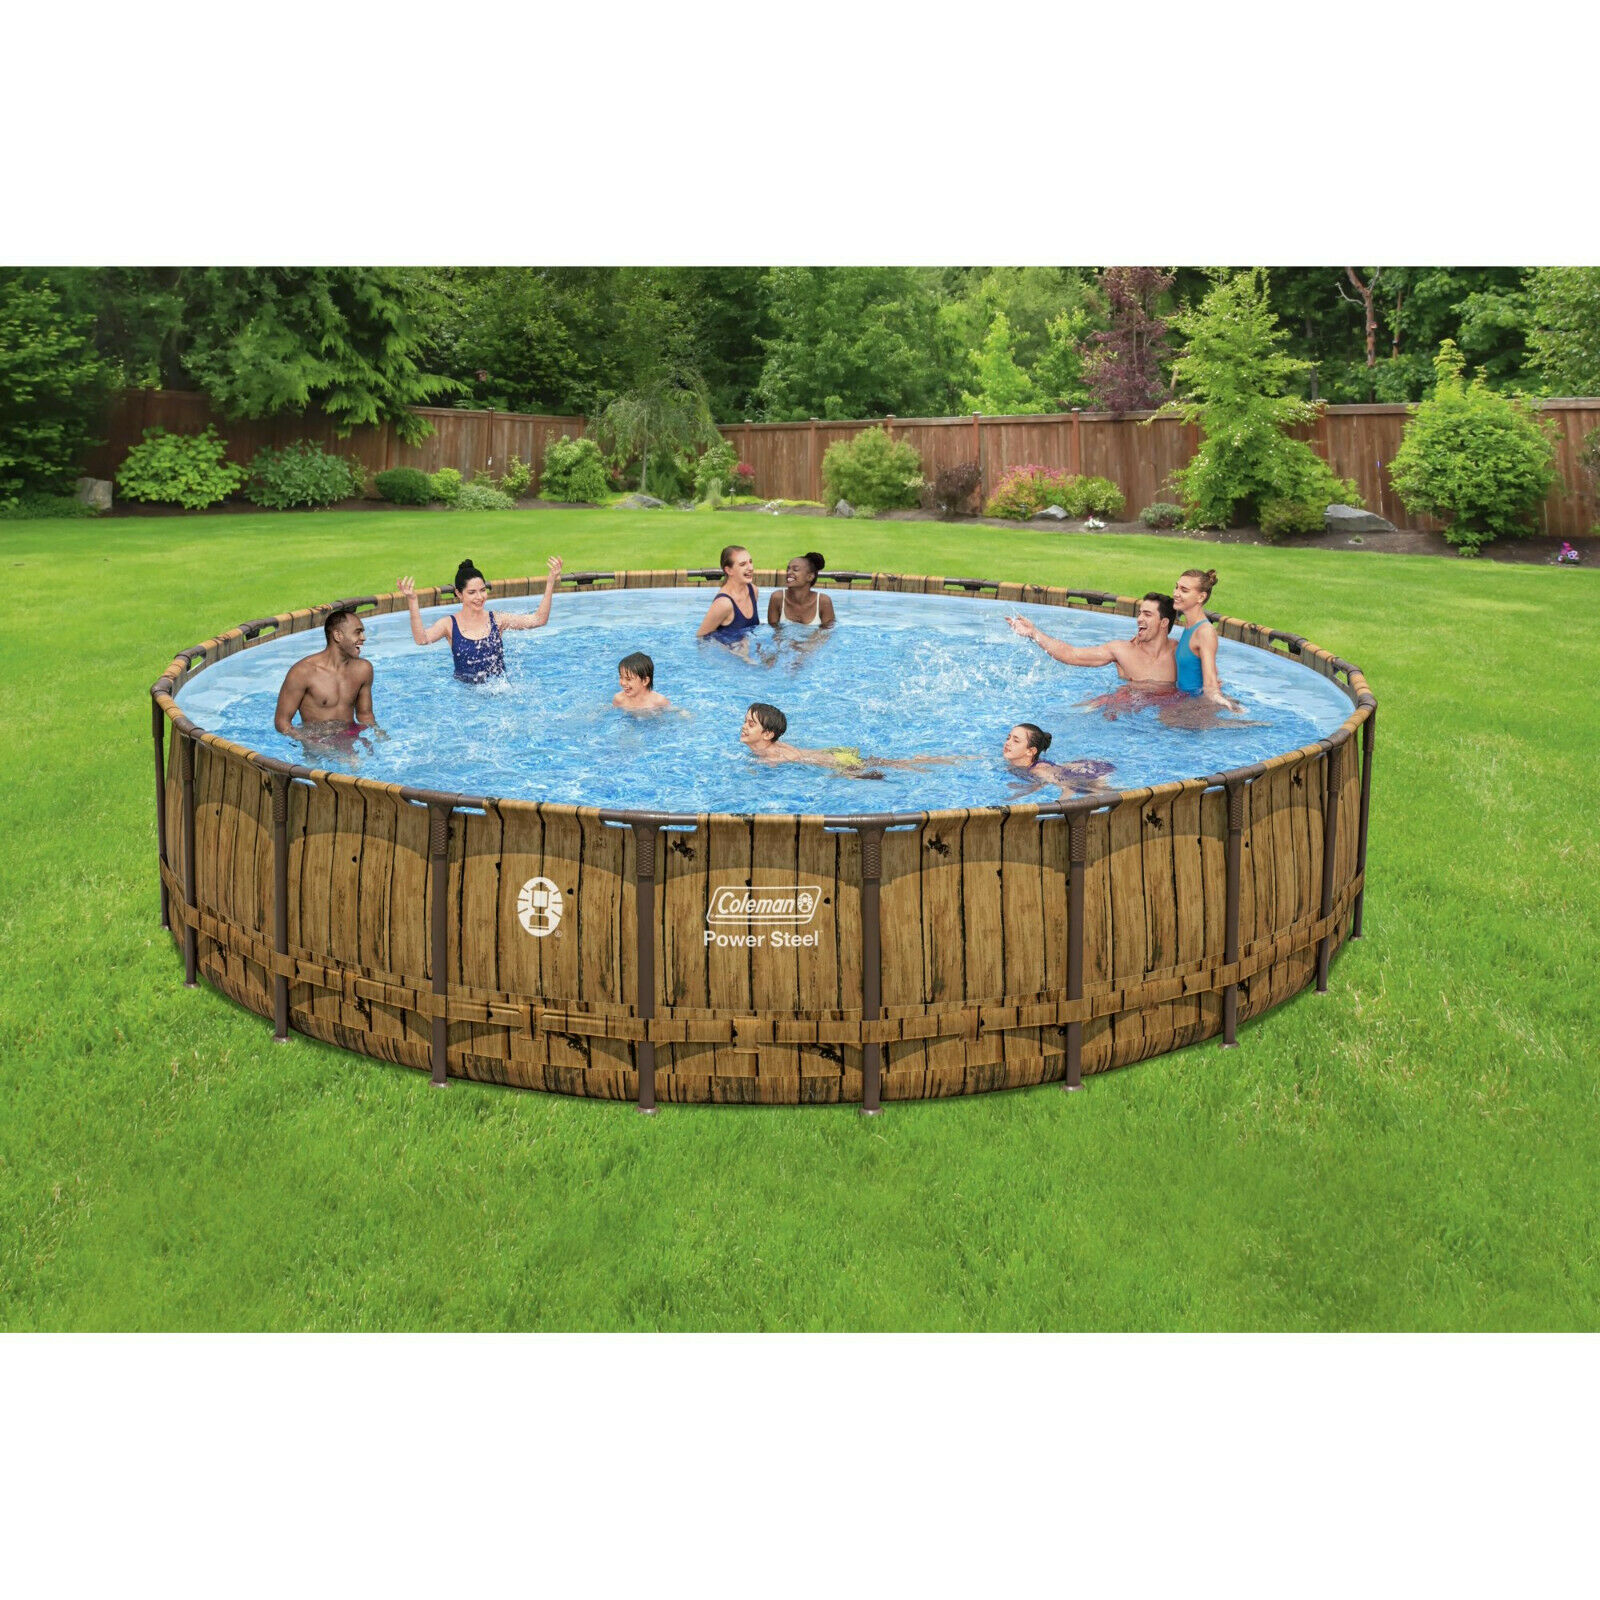 Coleman 22 ft x 52 in Power Steel Above Ground Pool Set - BRAND NEW